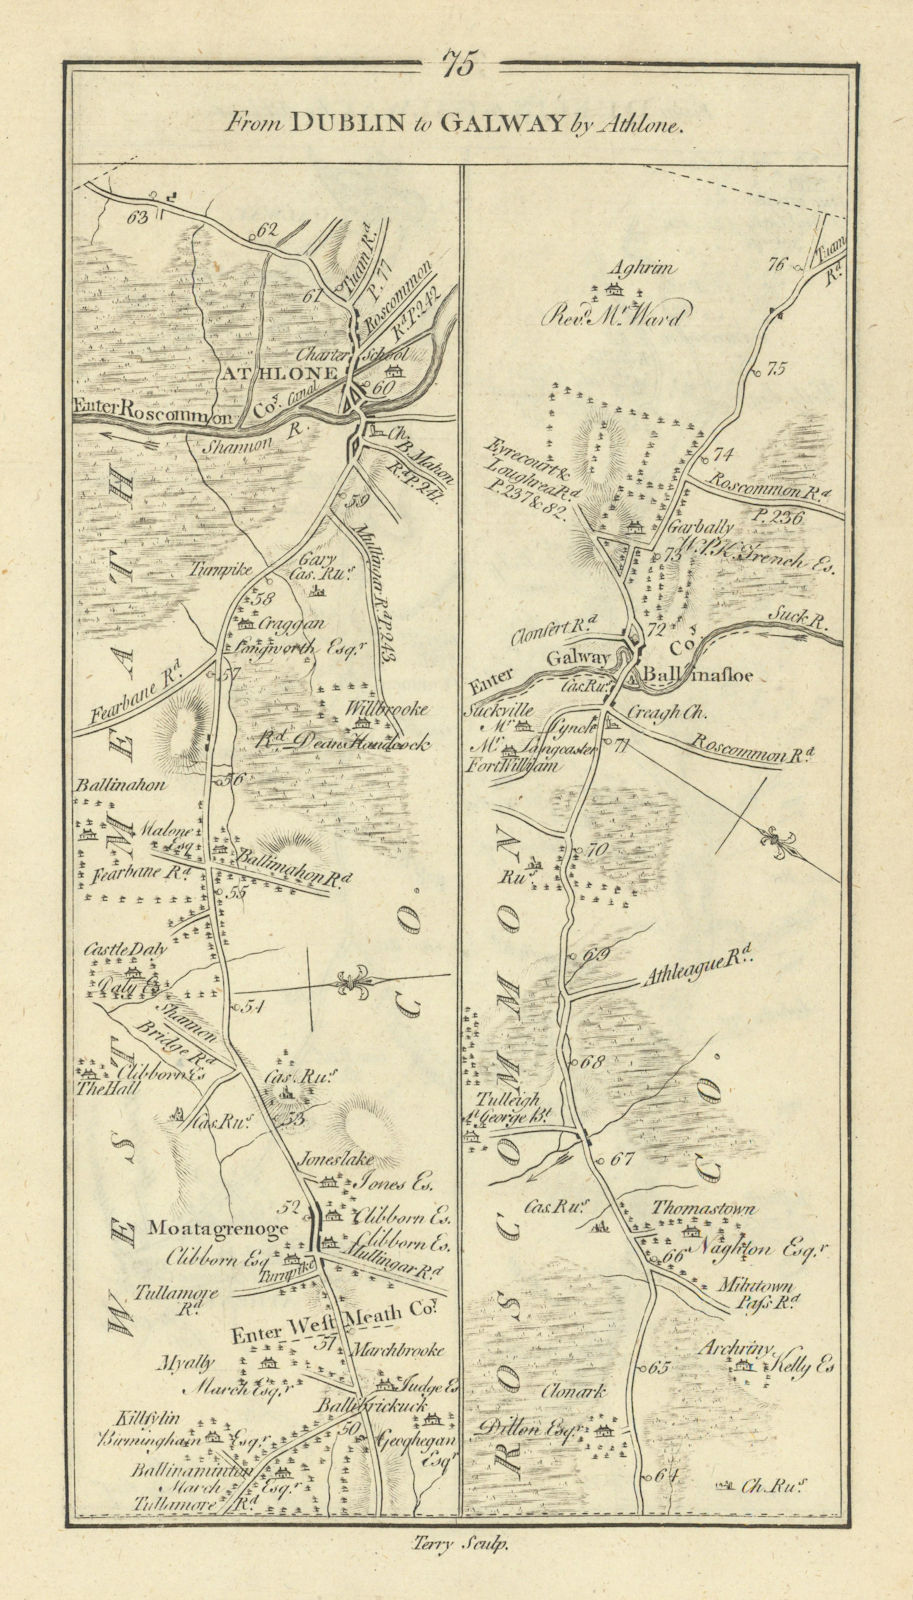 Associate Product #75 Dublin to Galway by Athlone. Moate Ballinasloe. TAYLOR/SKINNER 1778 map